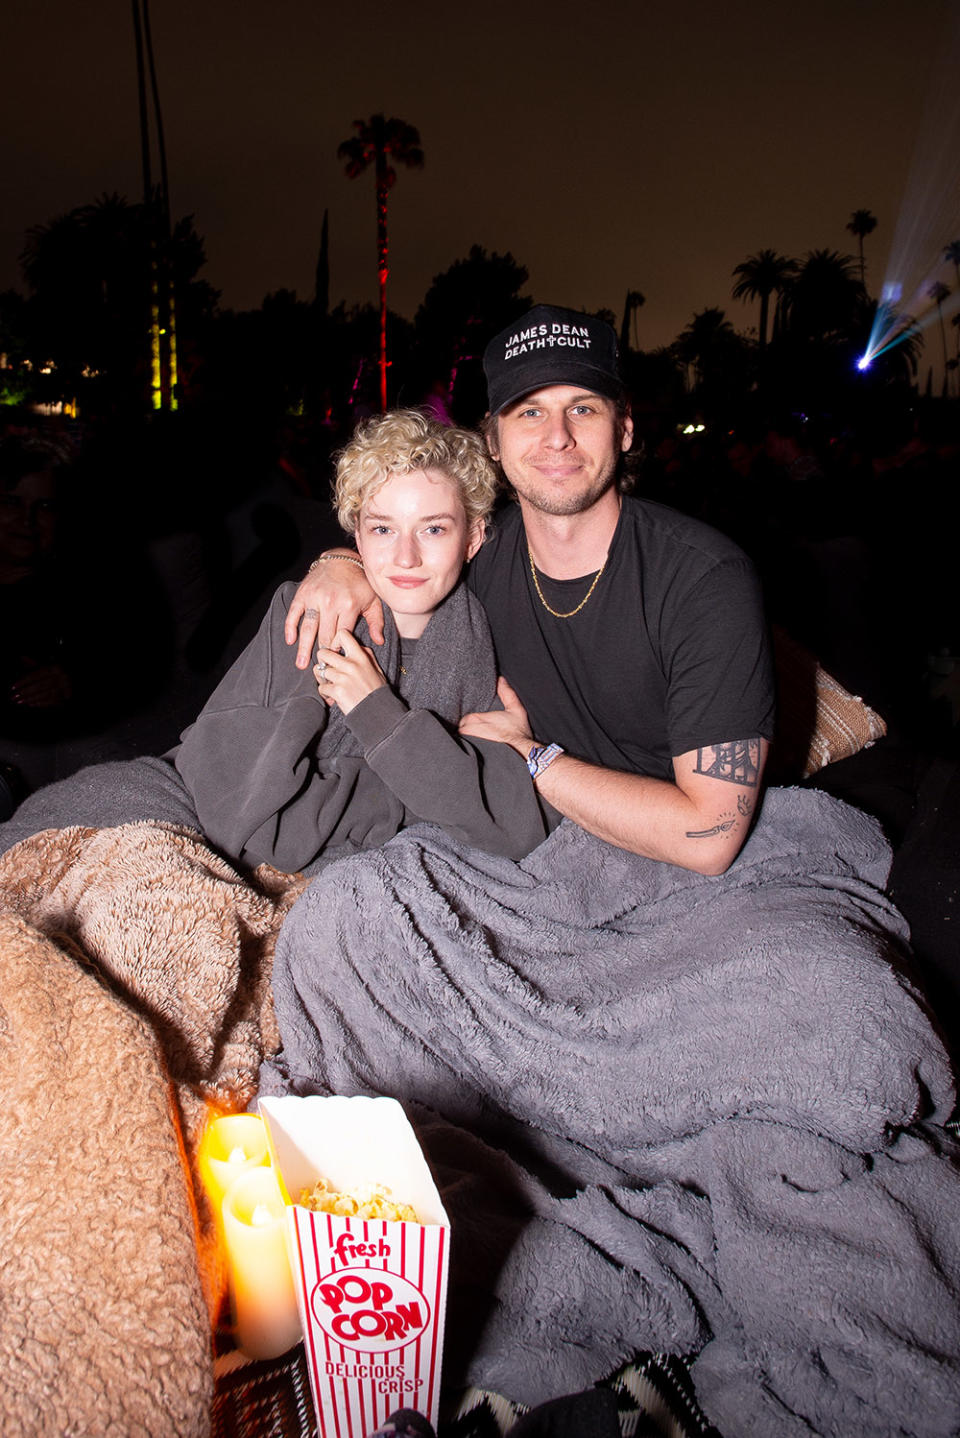 Julia Garner and Mark Foster Attend Cinespia’s Screening of ‘Gentlemen Prefer Blondes’ at Hollywood Forever in Partnership with LA Pride Presented by Amazon Studios